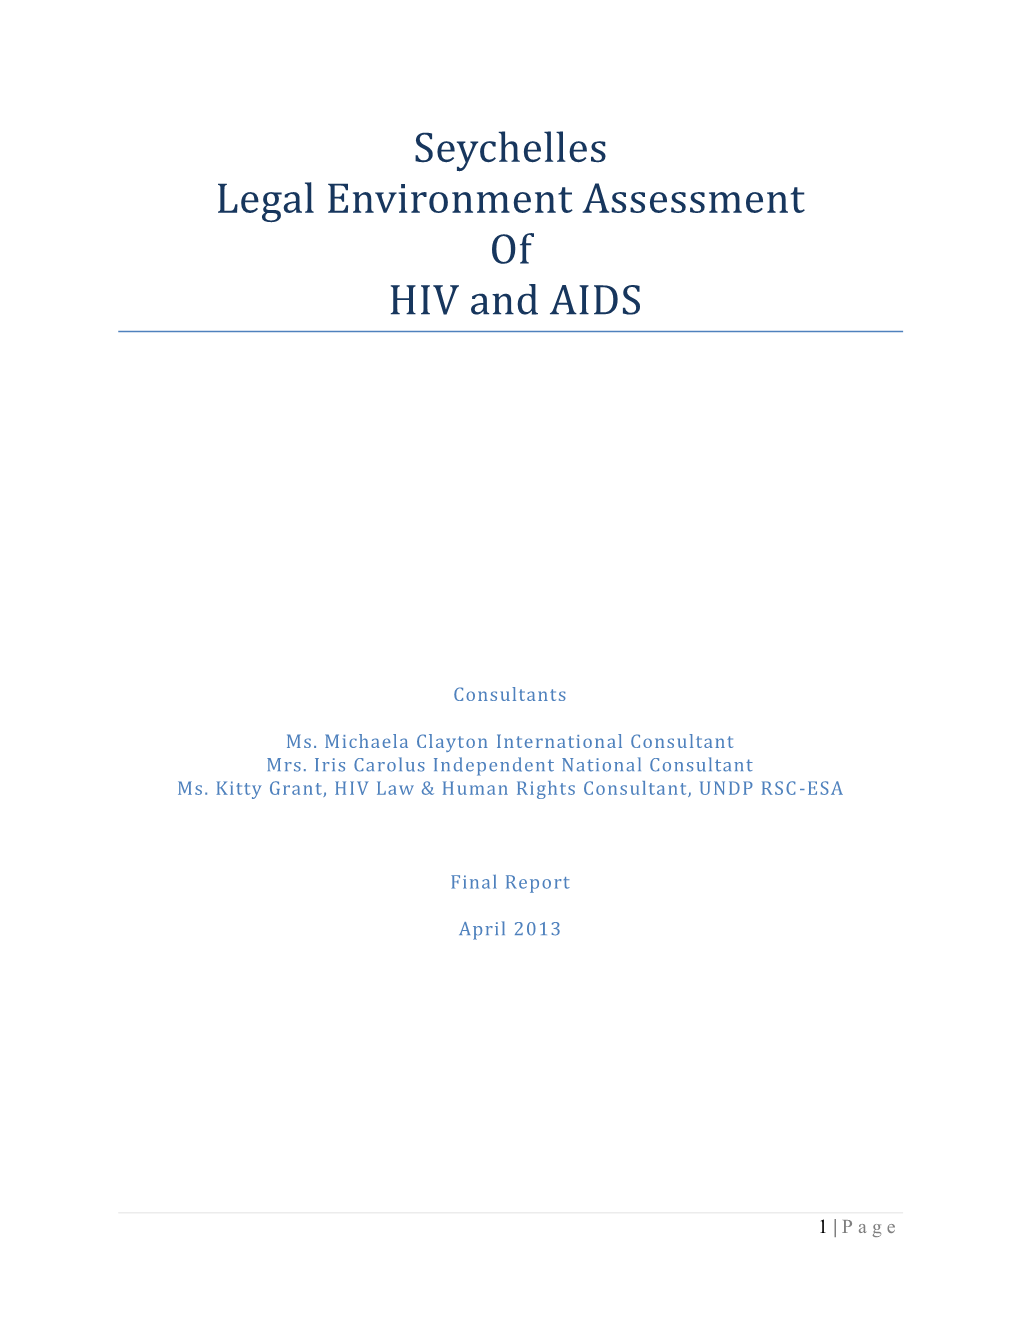 Seychelles Legal Environment Assessment of HIV and AIDS